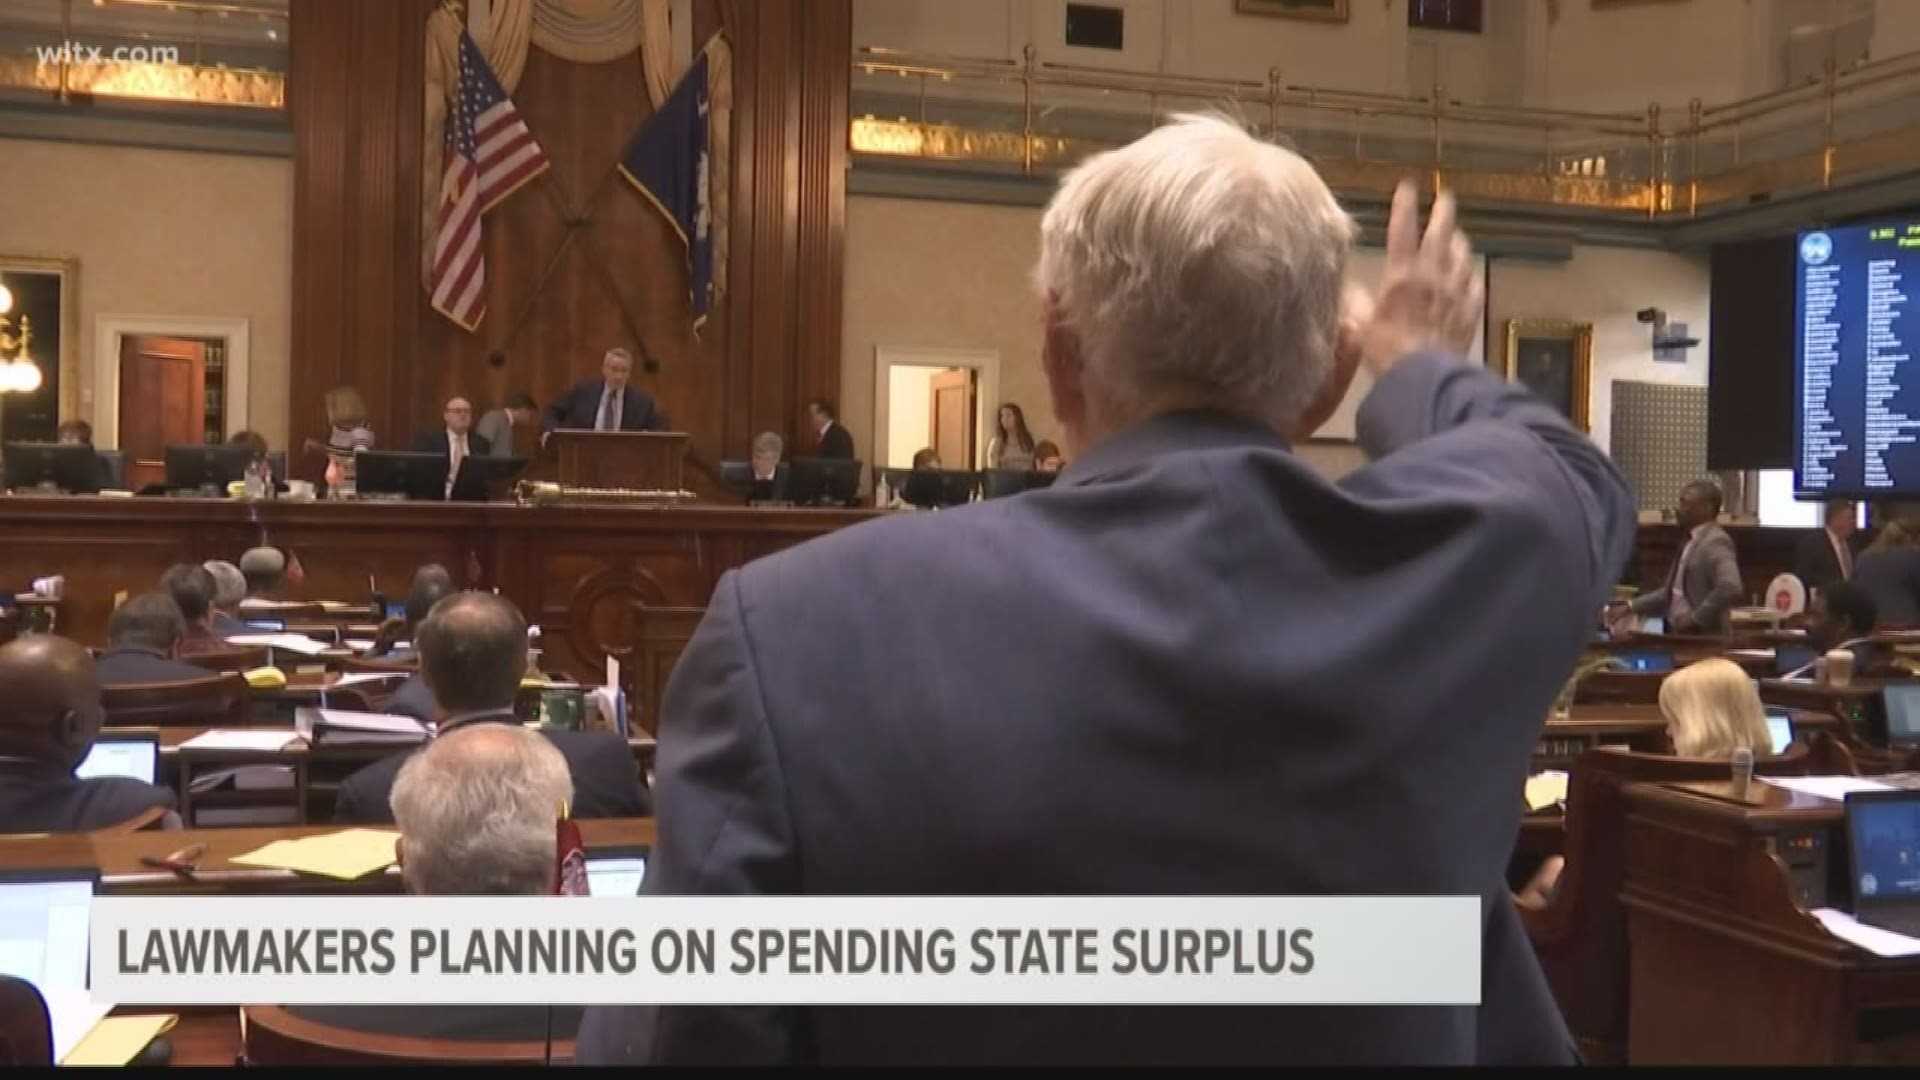 VIDEO: Economic advisers predict that South Carolina will have a surplus of $1.8 billion for the 2020 fiscal year.